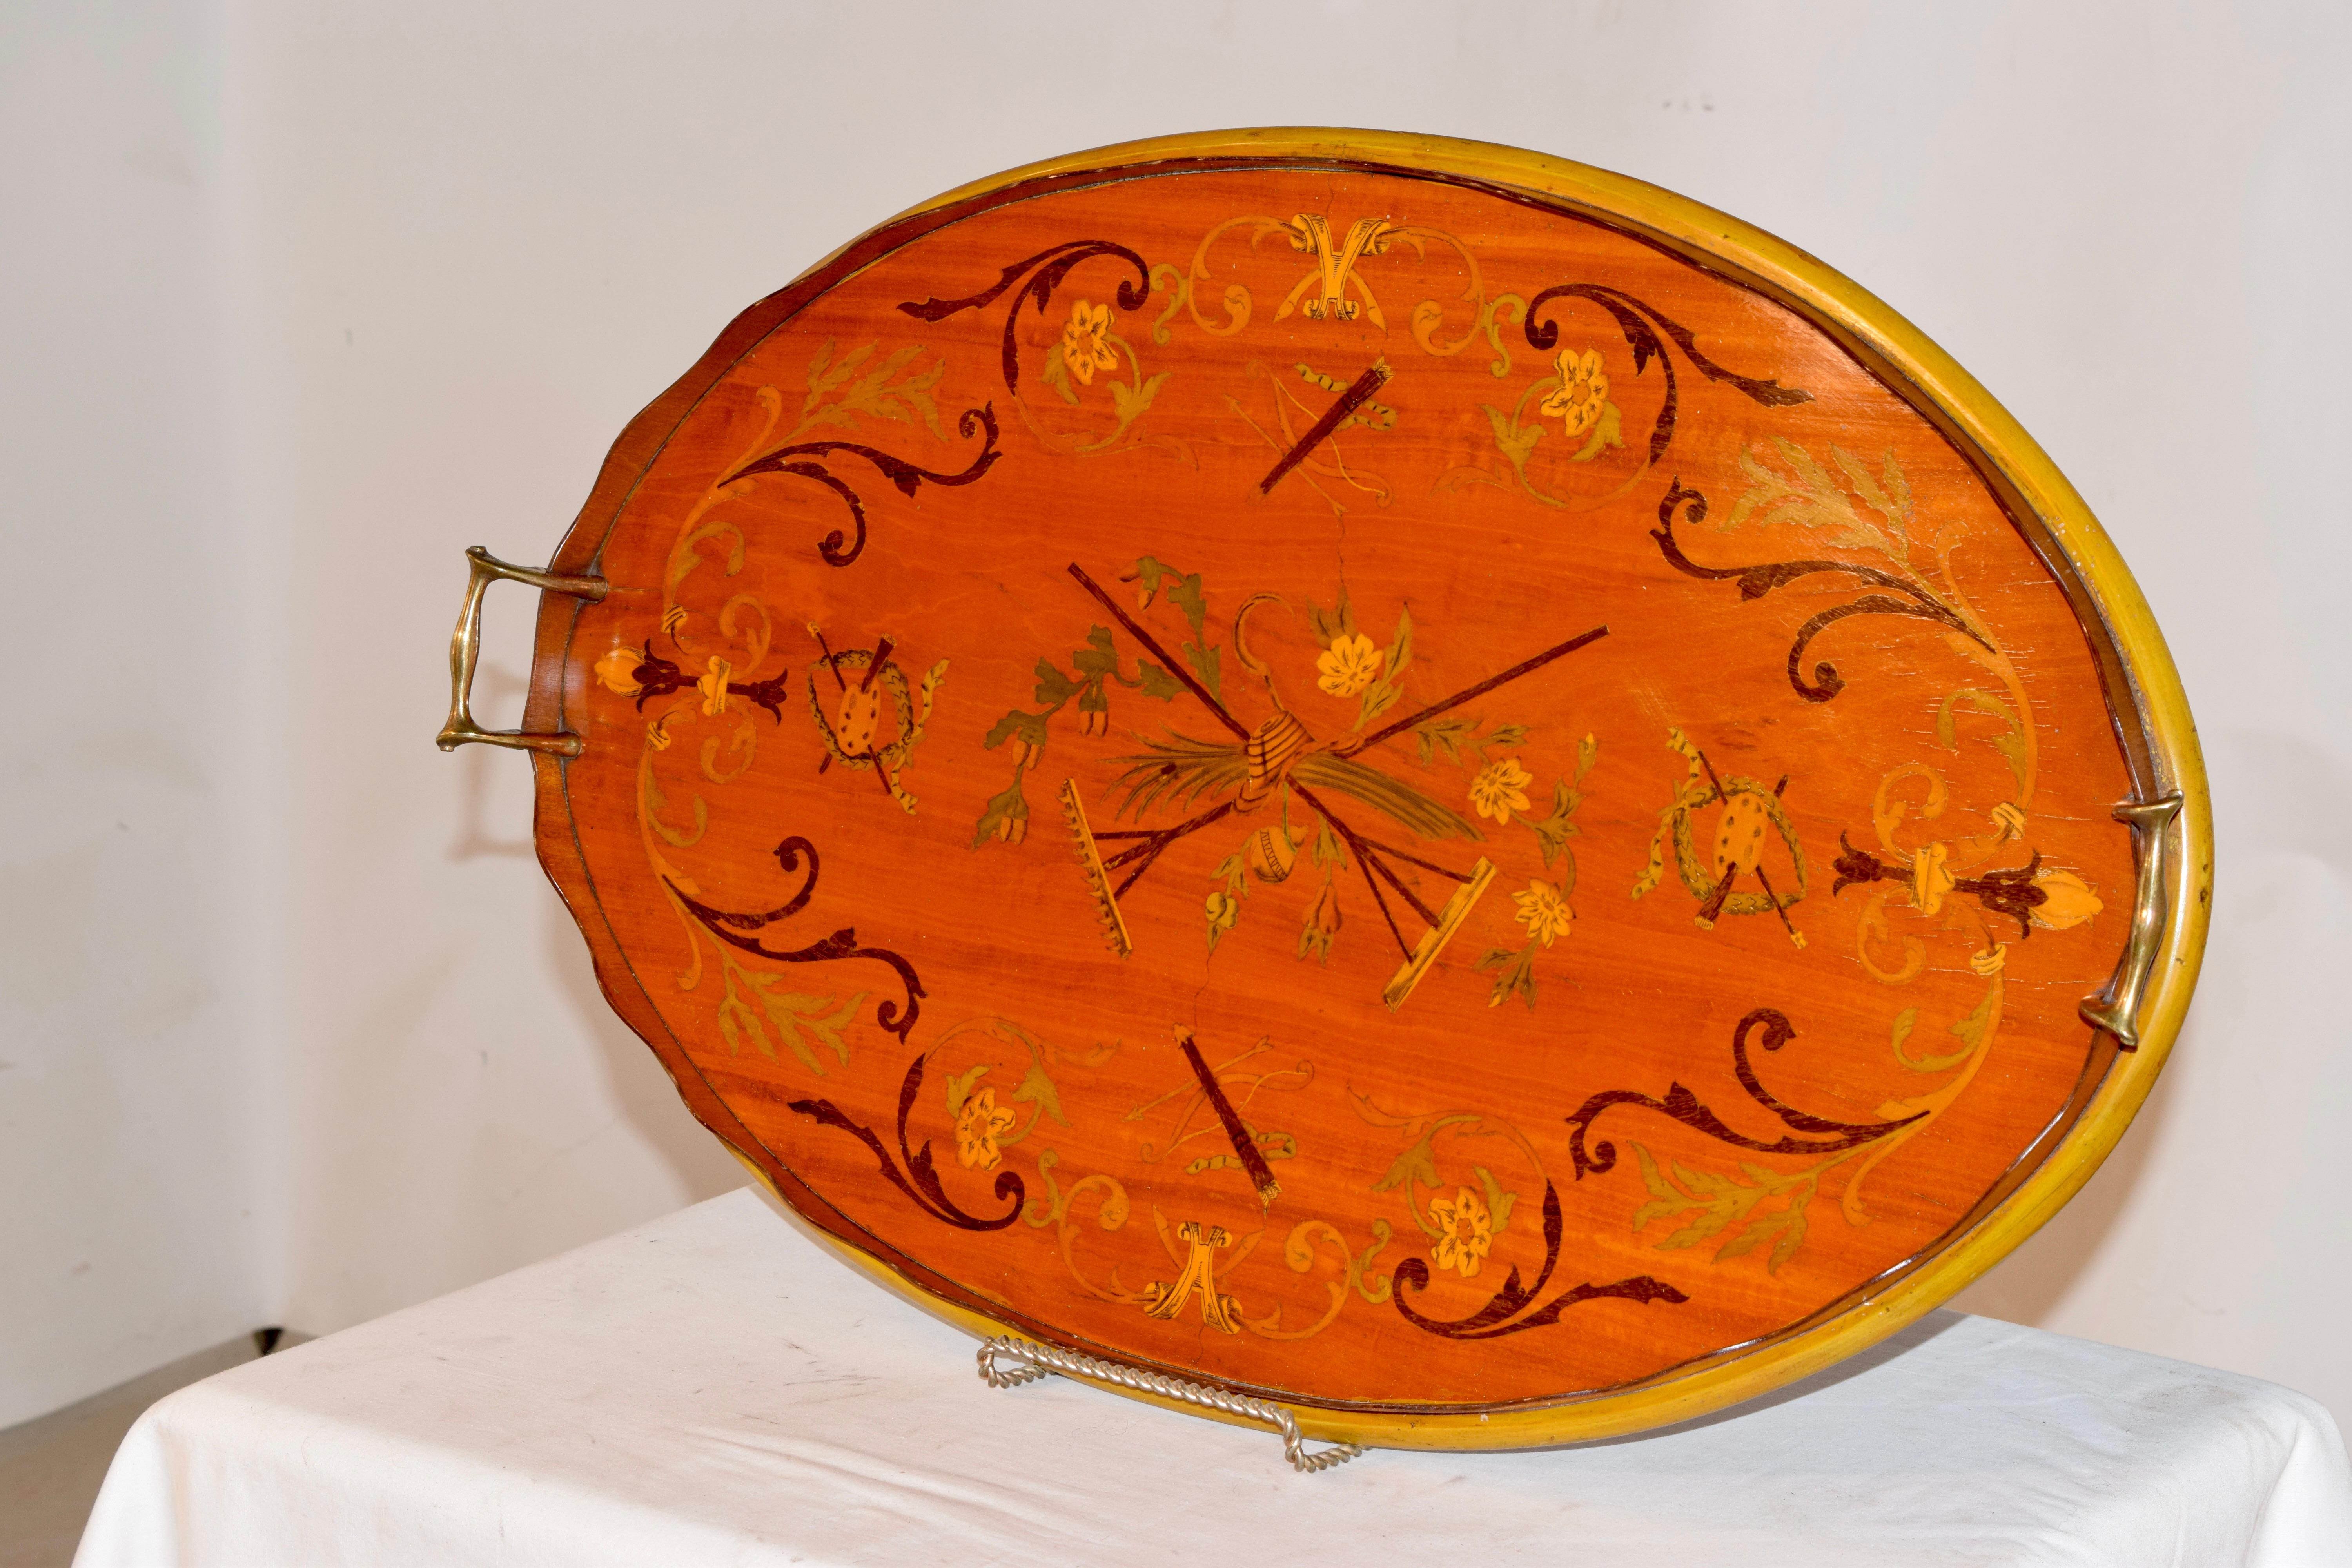 19th century wonderful quality Georgian mahogany tray with a scalloped gallery surrounding a beautifully inlaid central gardening design with crossed implements, which are flanked by wreaths surrounding artists palettes and surrounded by wonderfully